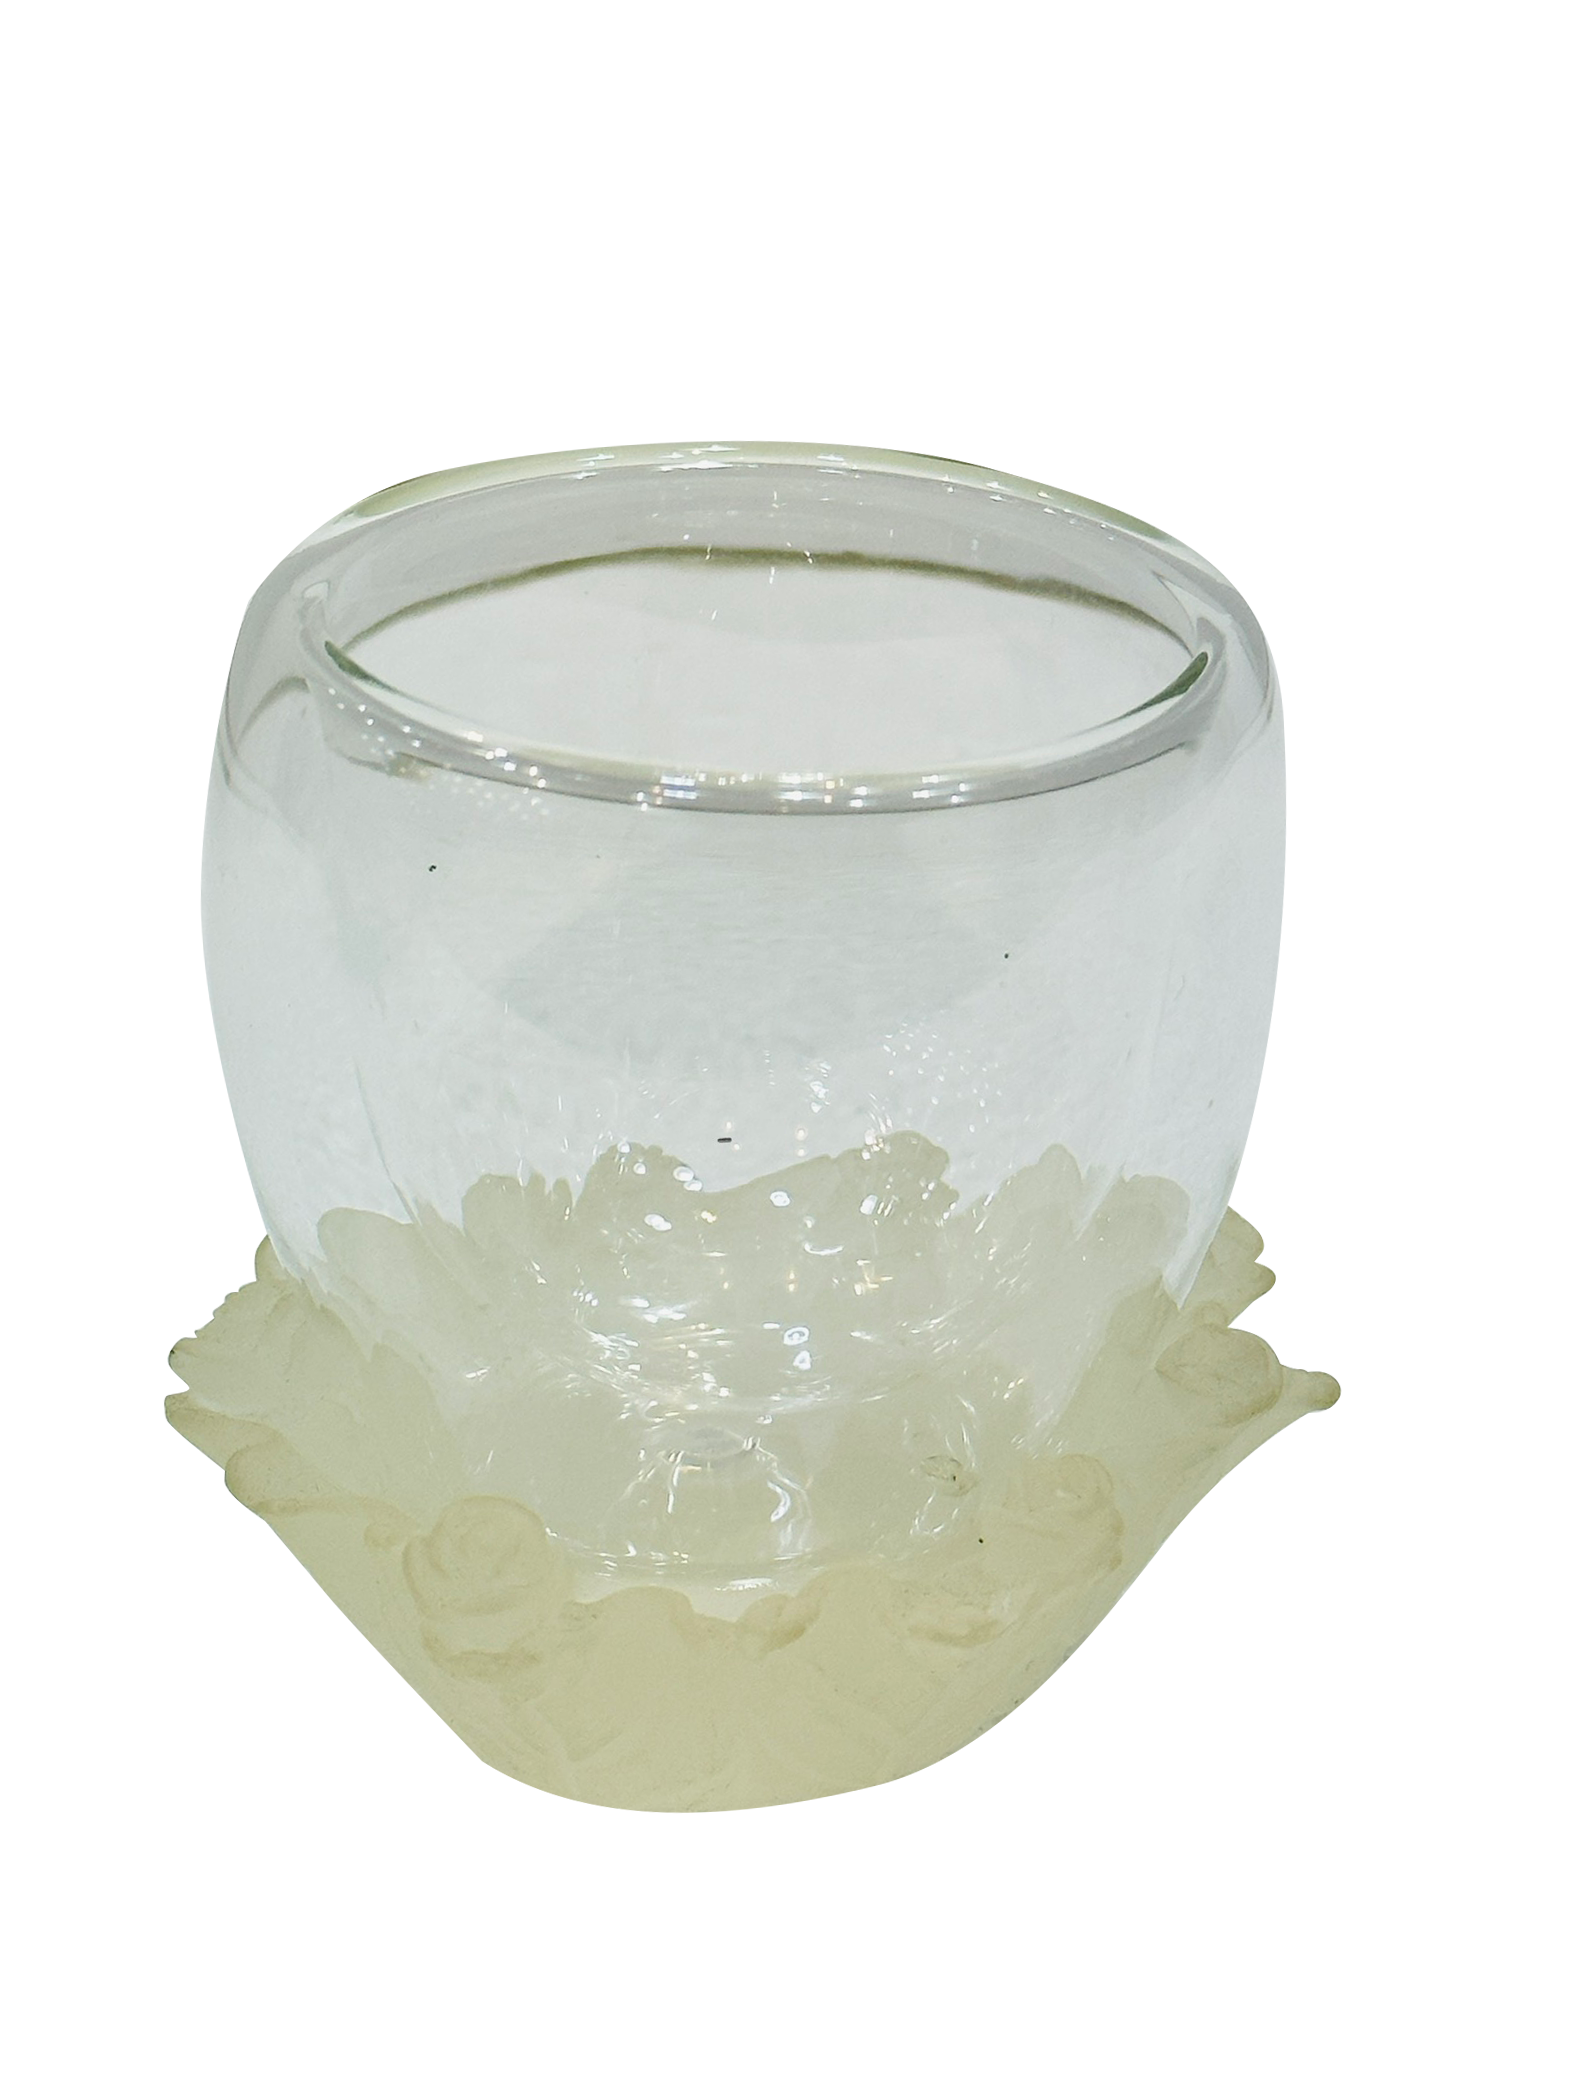 Big Round Crystal Bowl - Sunset Gifts Store